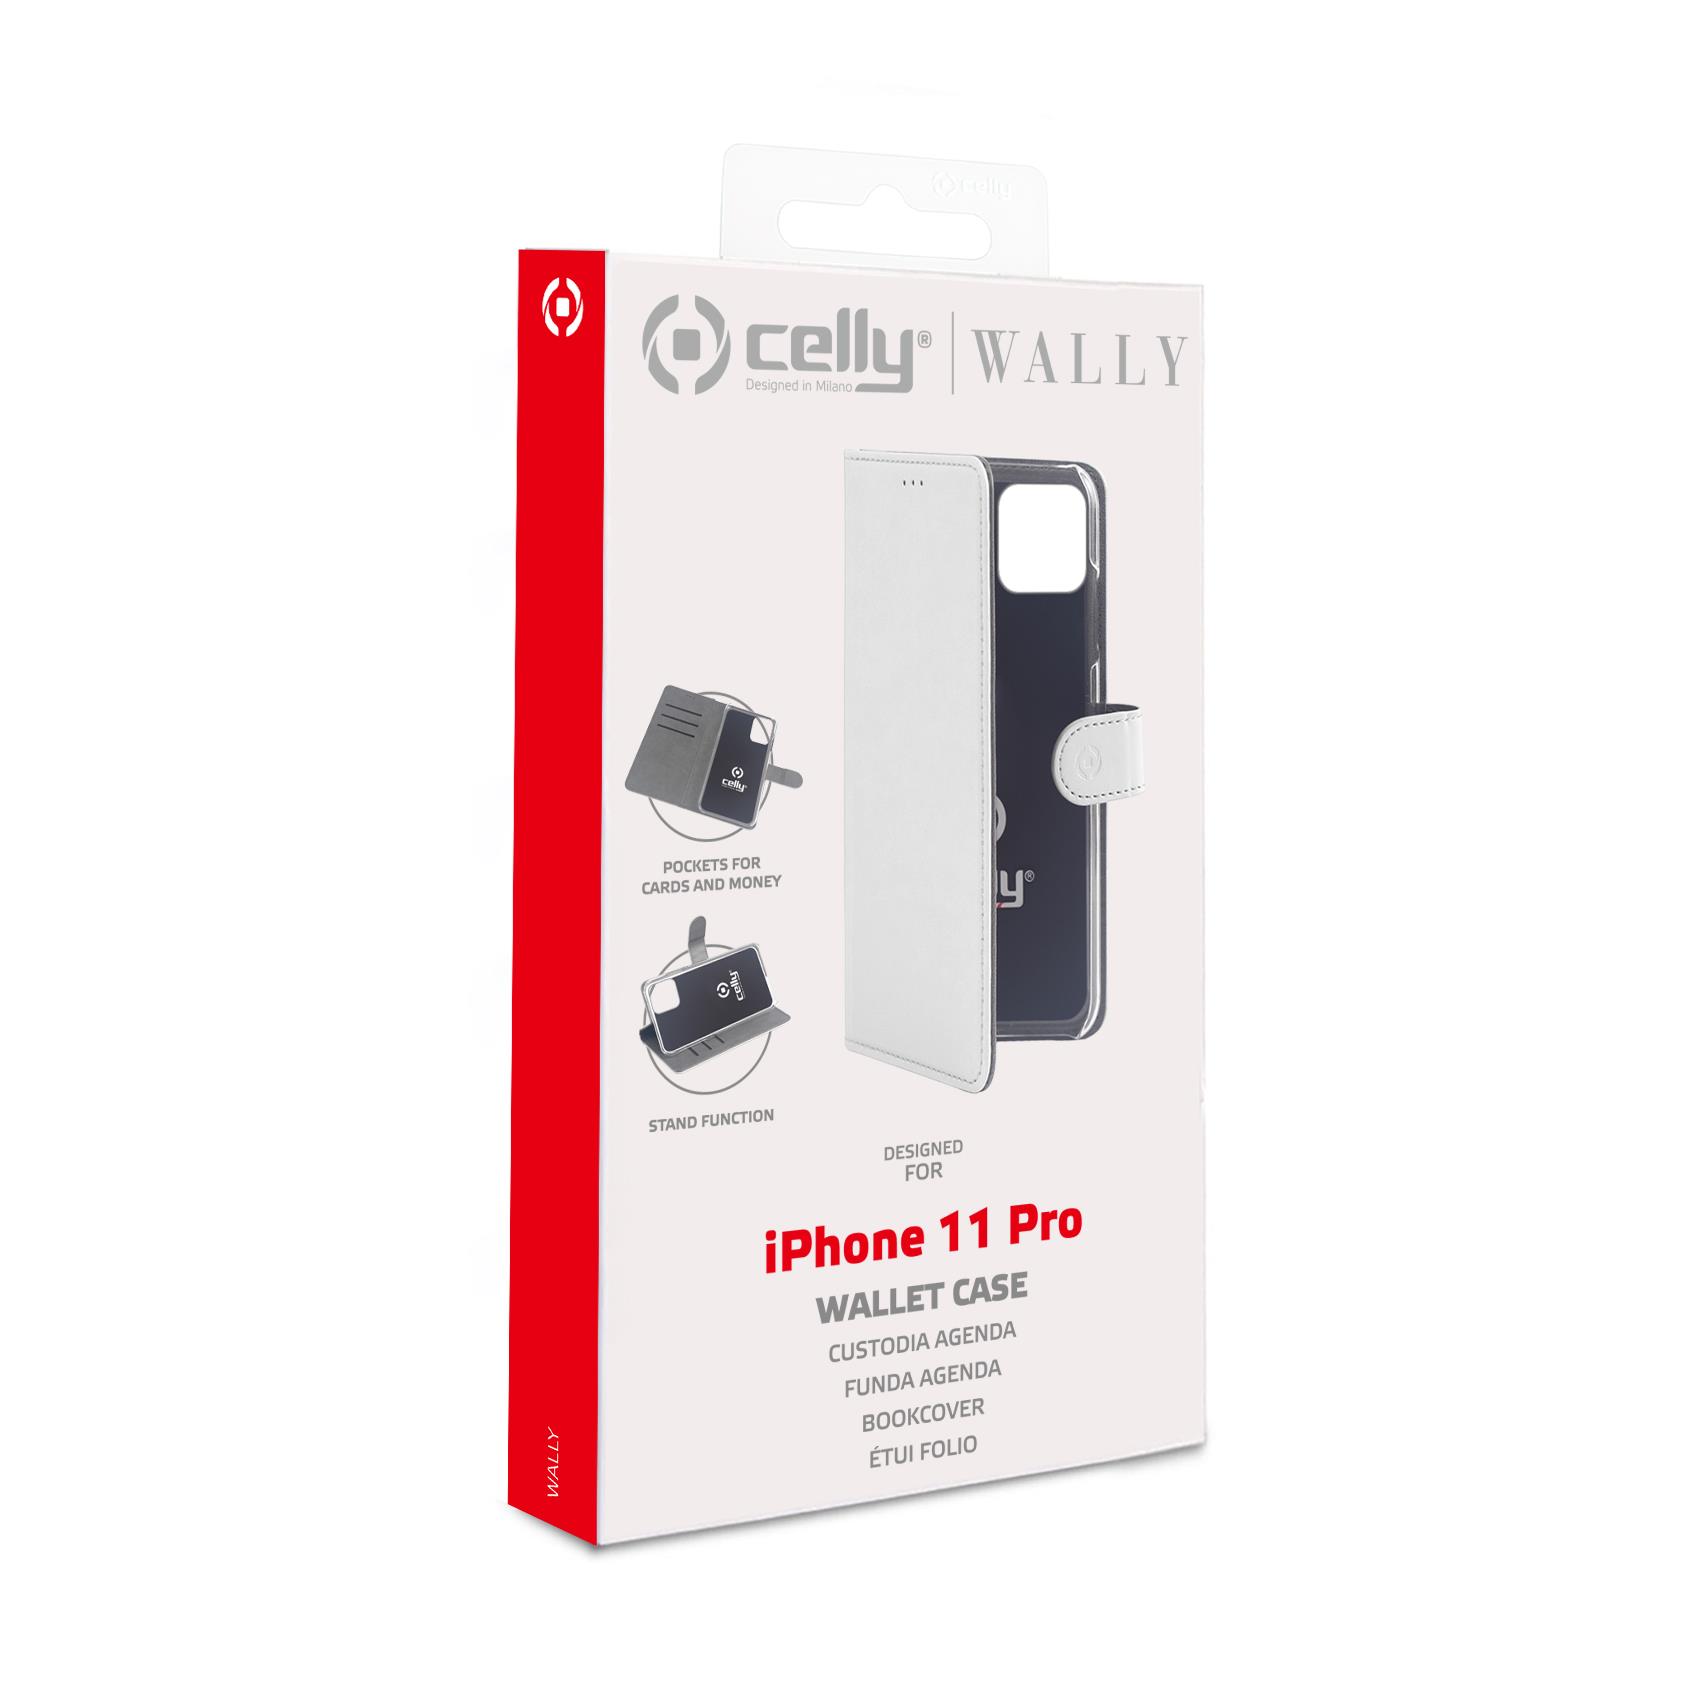 Wally Case Iphone 11 Pro White Celly Wally1000wh 8021735752516